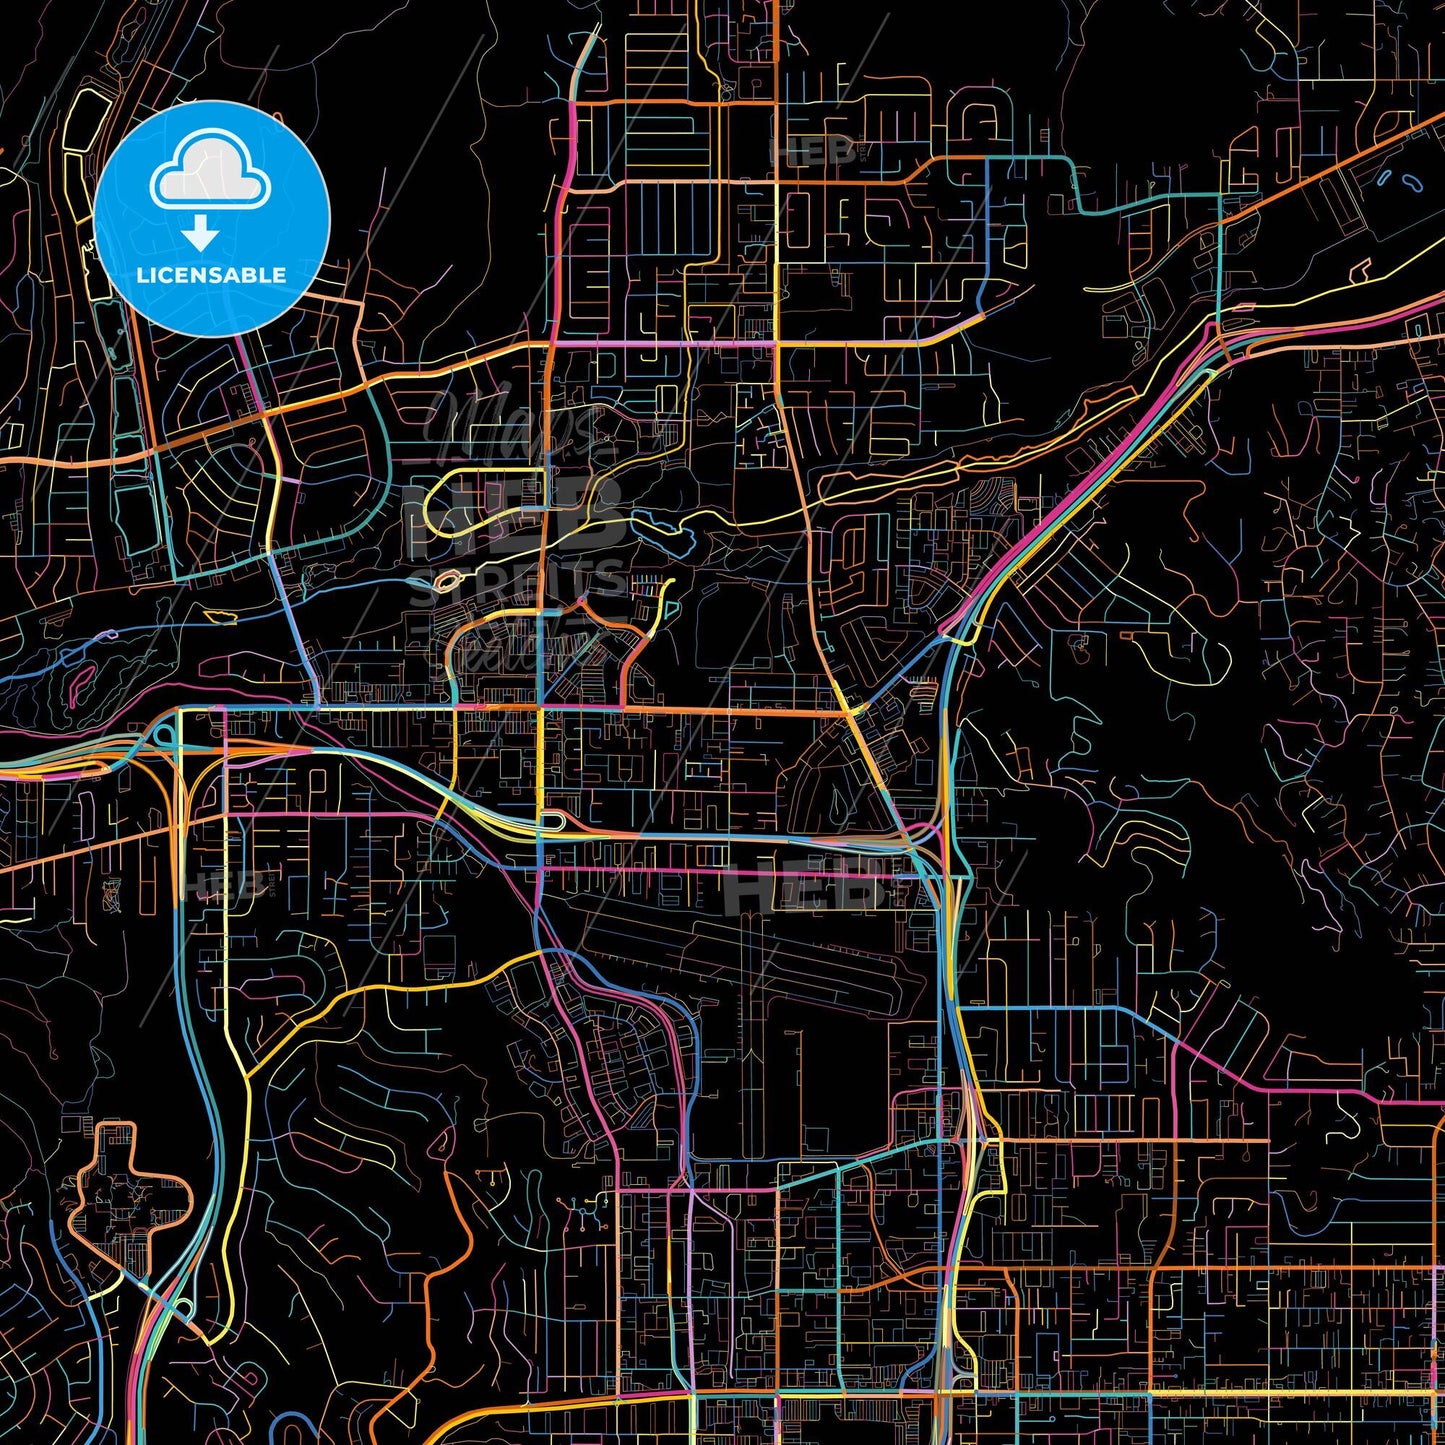 Santee, California, United States, colorful city map on black background